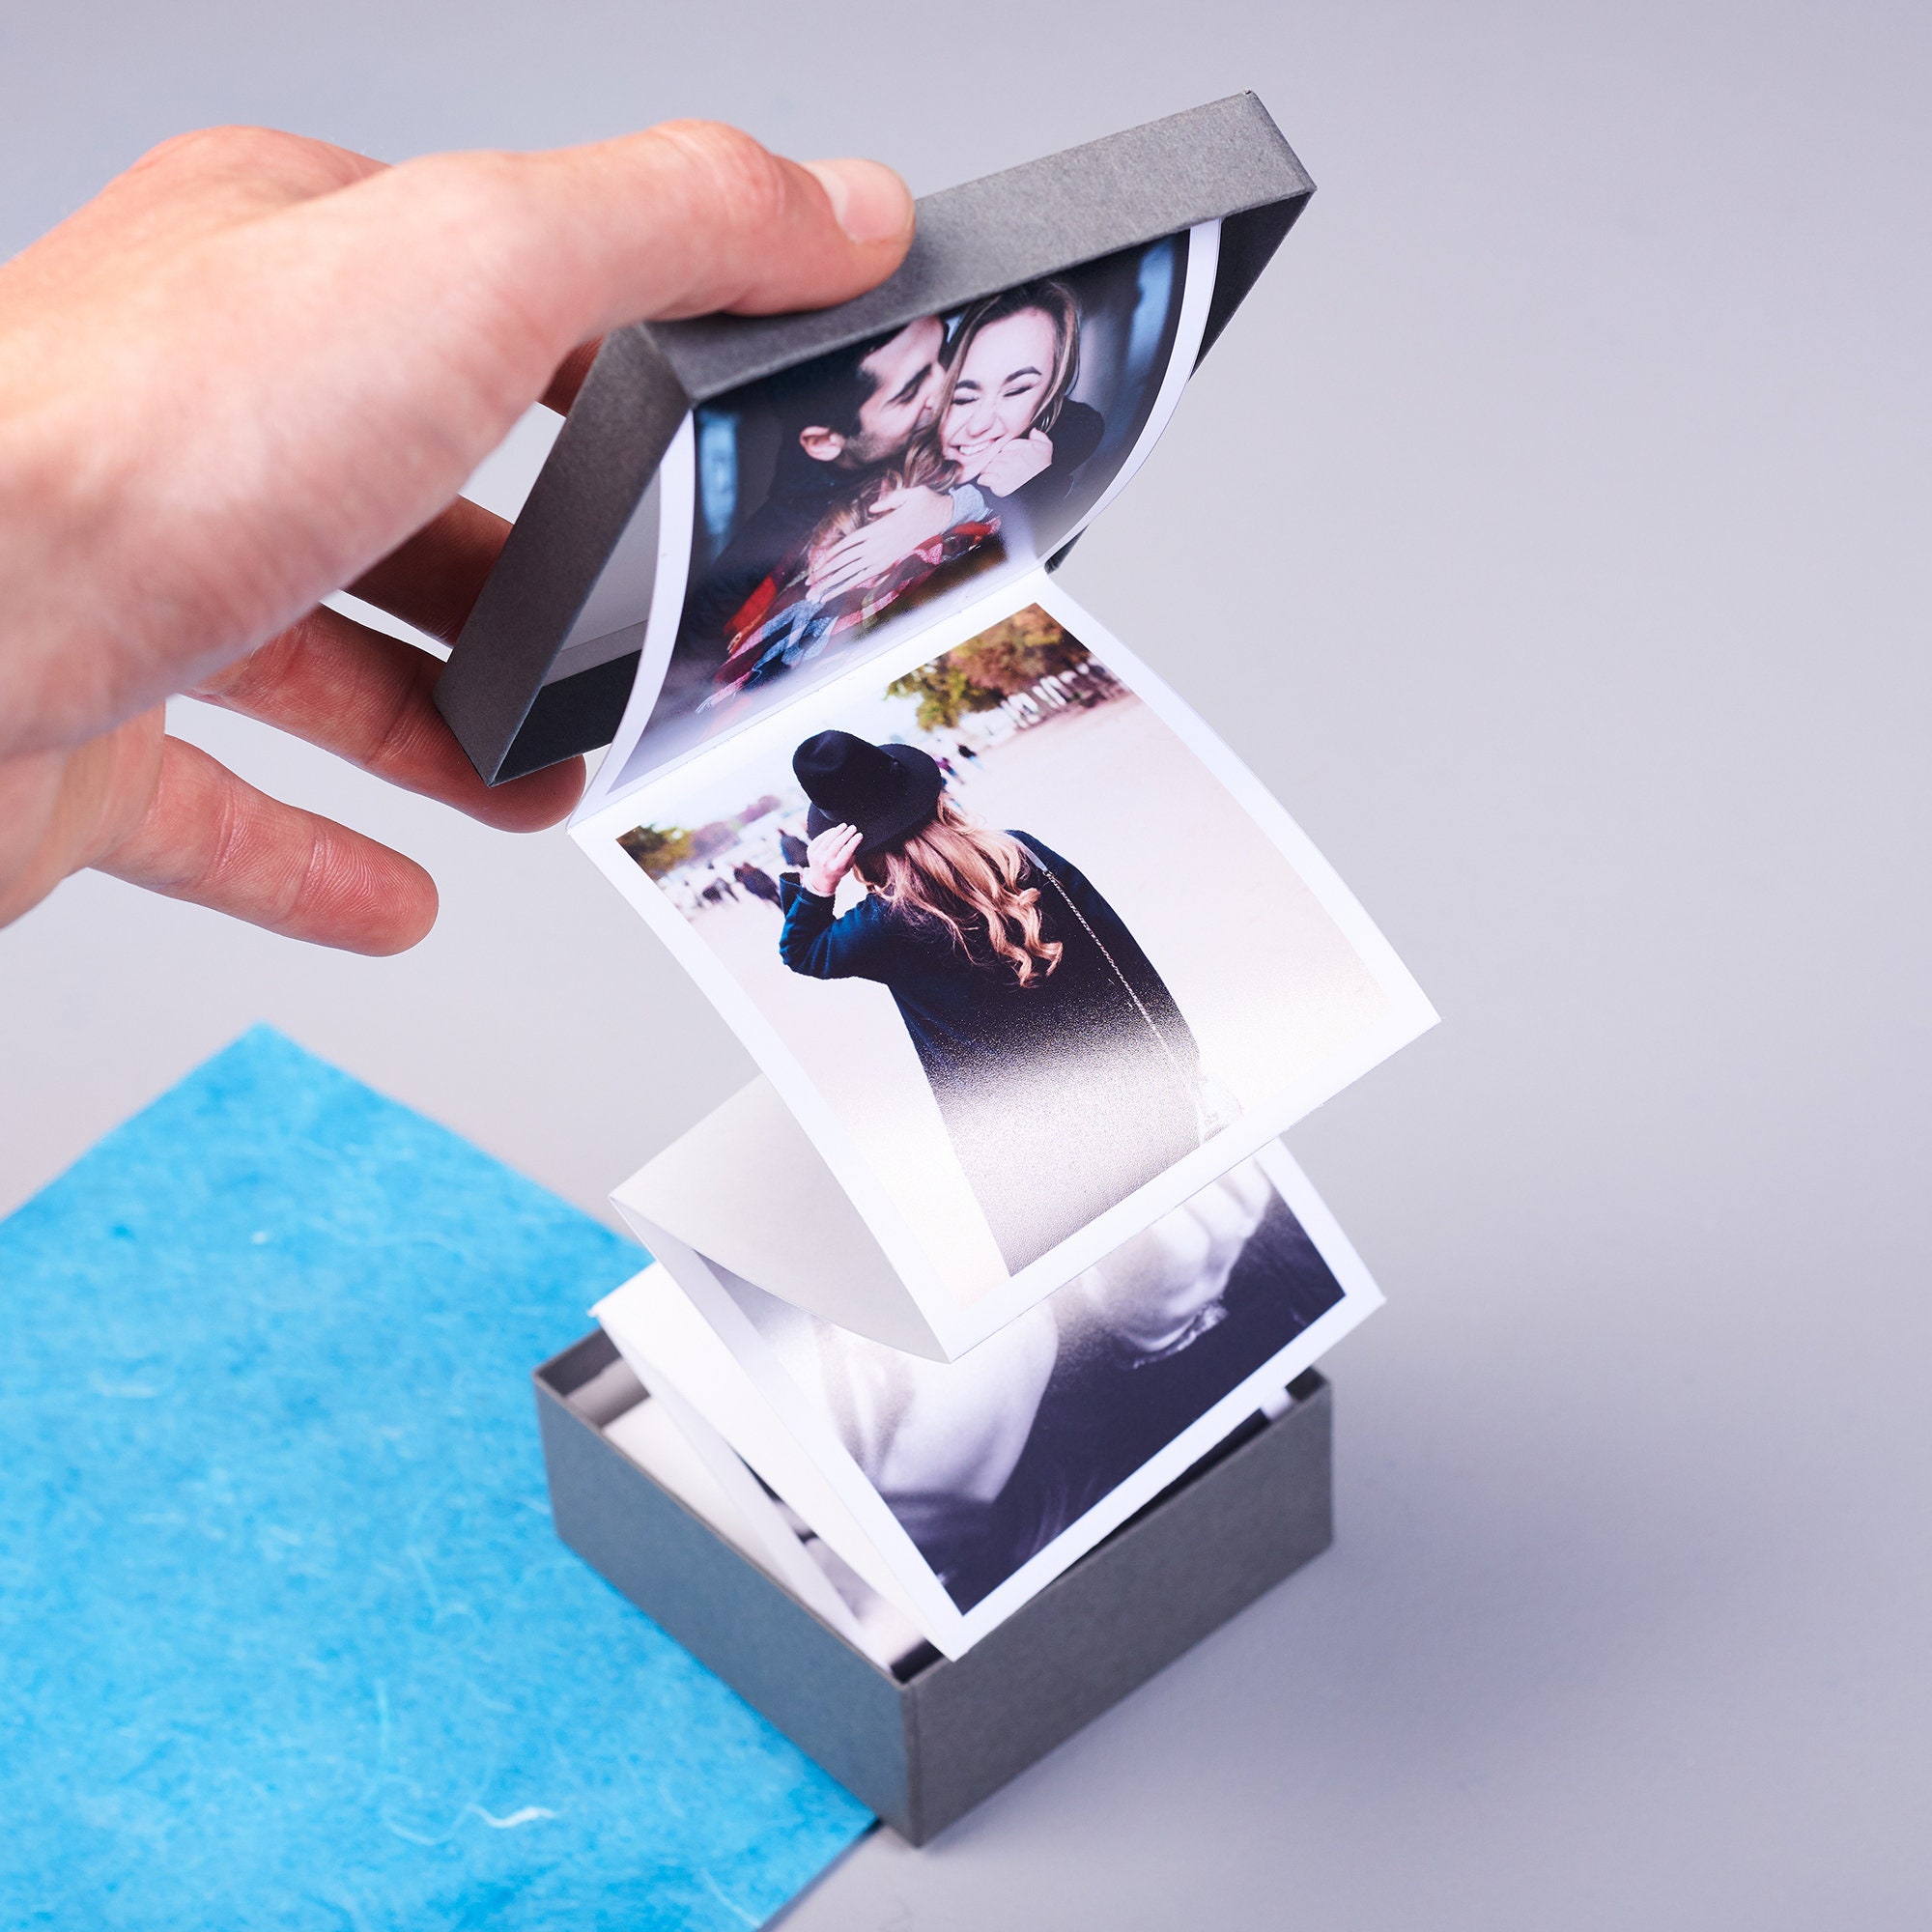 Personalised Photo Strip Popup Gift Box with Printed Pictures – 8